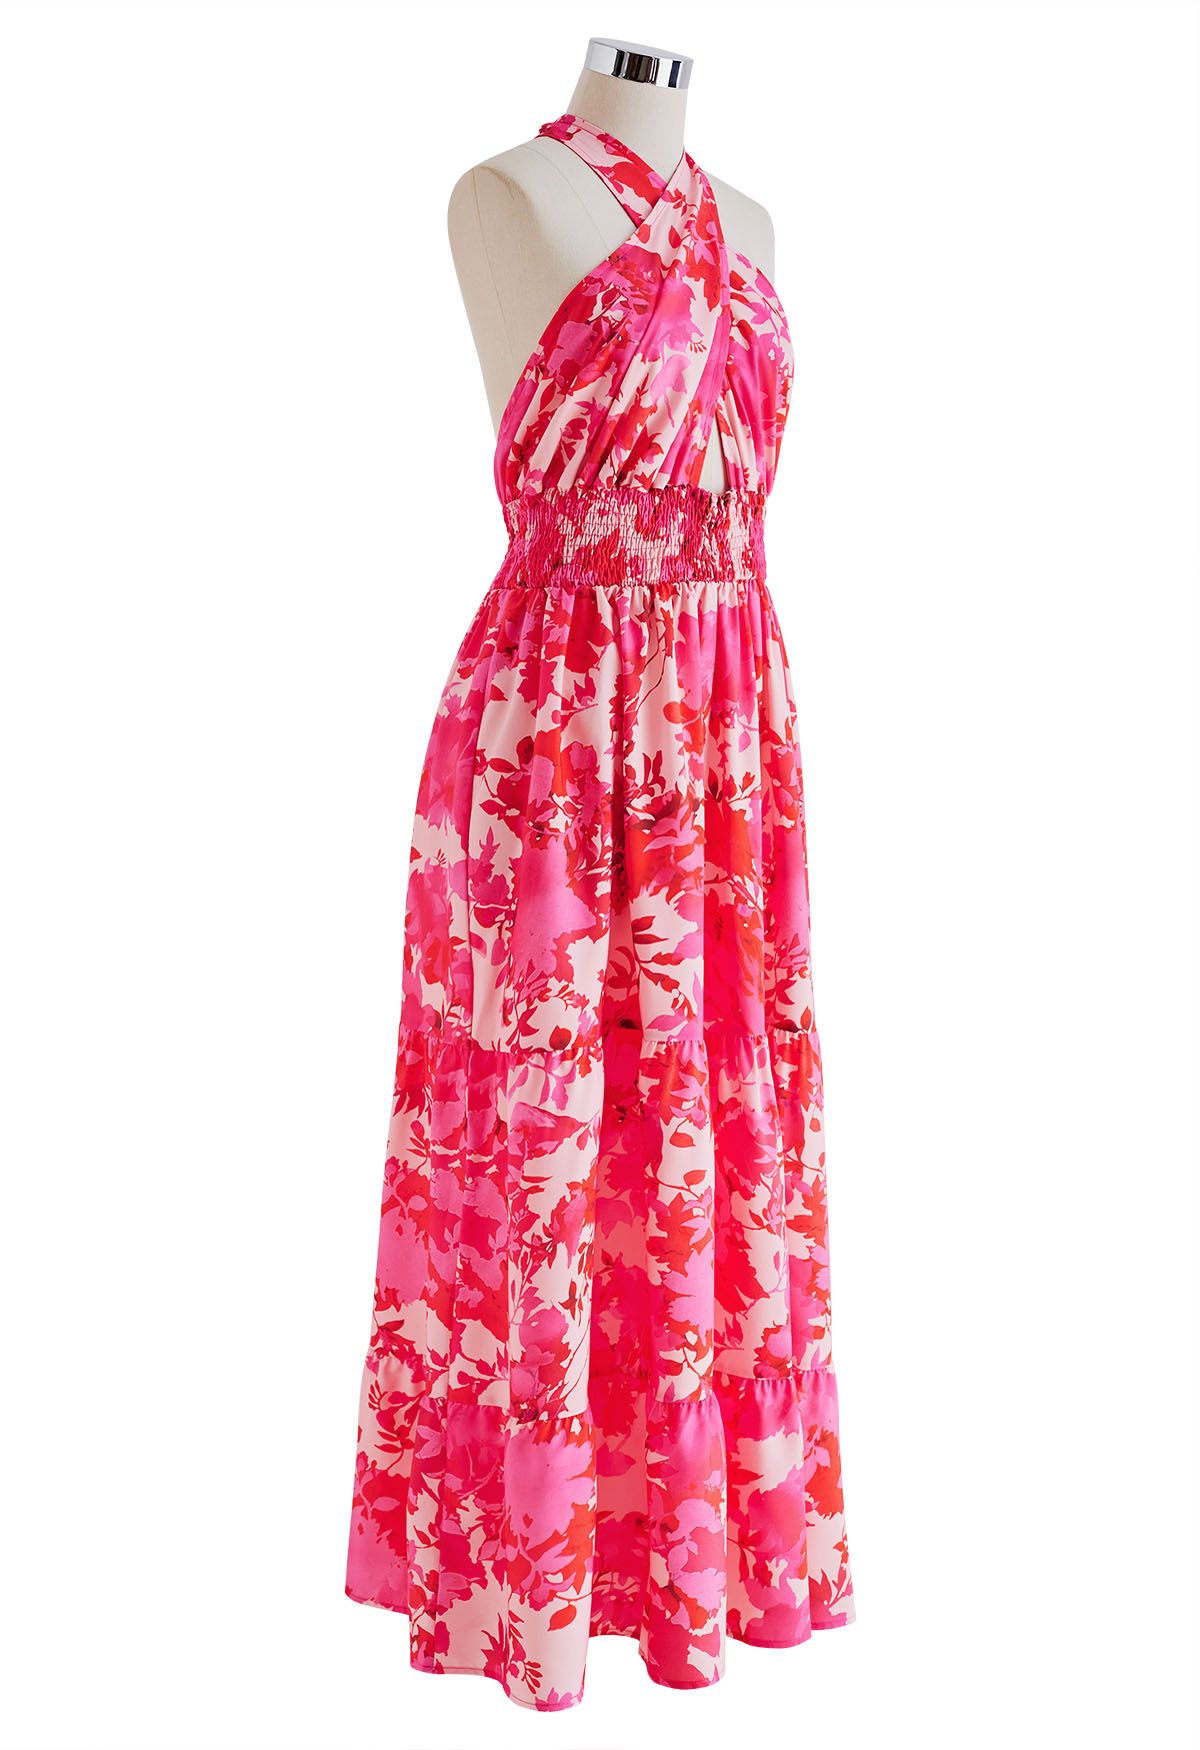 Hot Pink Floral Halter Maxi Dress - Retro, Indie and Unique Fashion